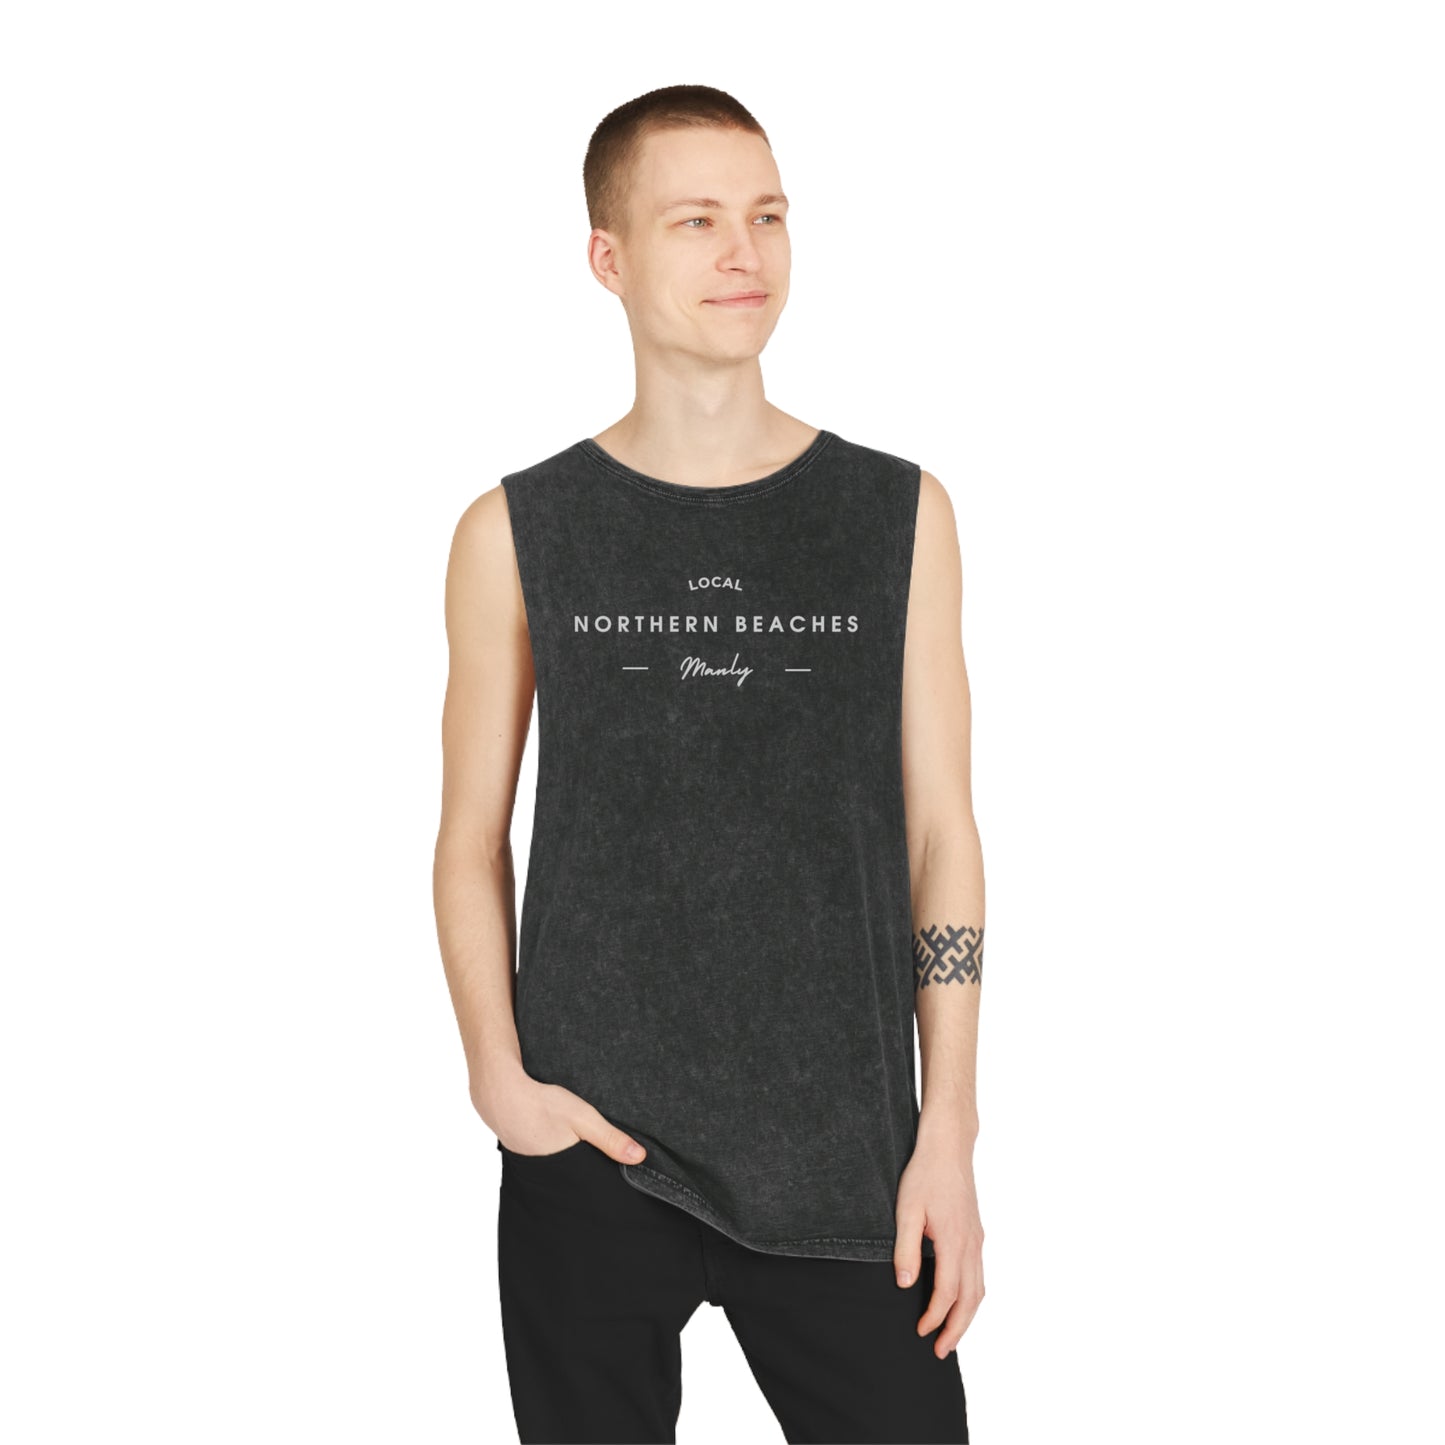 Stonewash Tank Top with Northern Beaches Manly logo